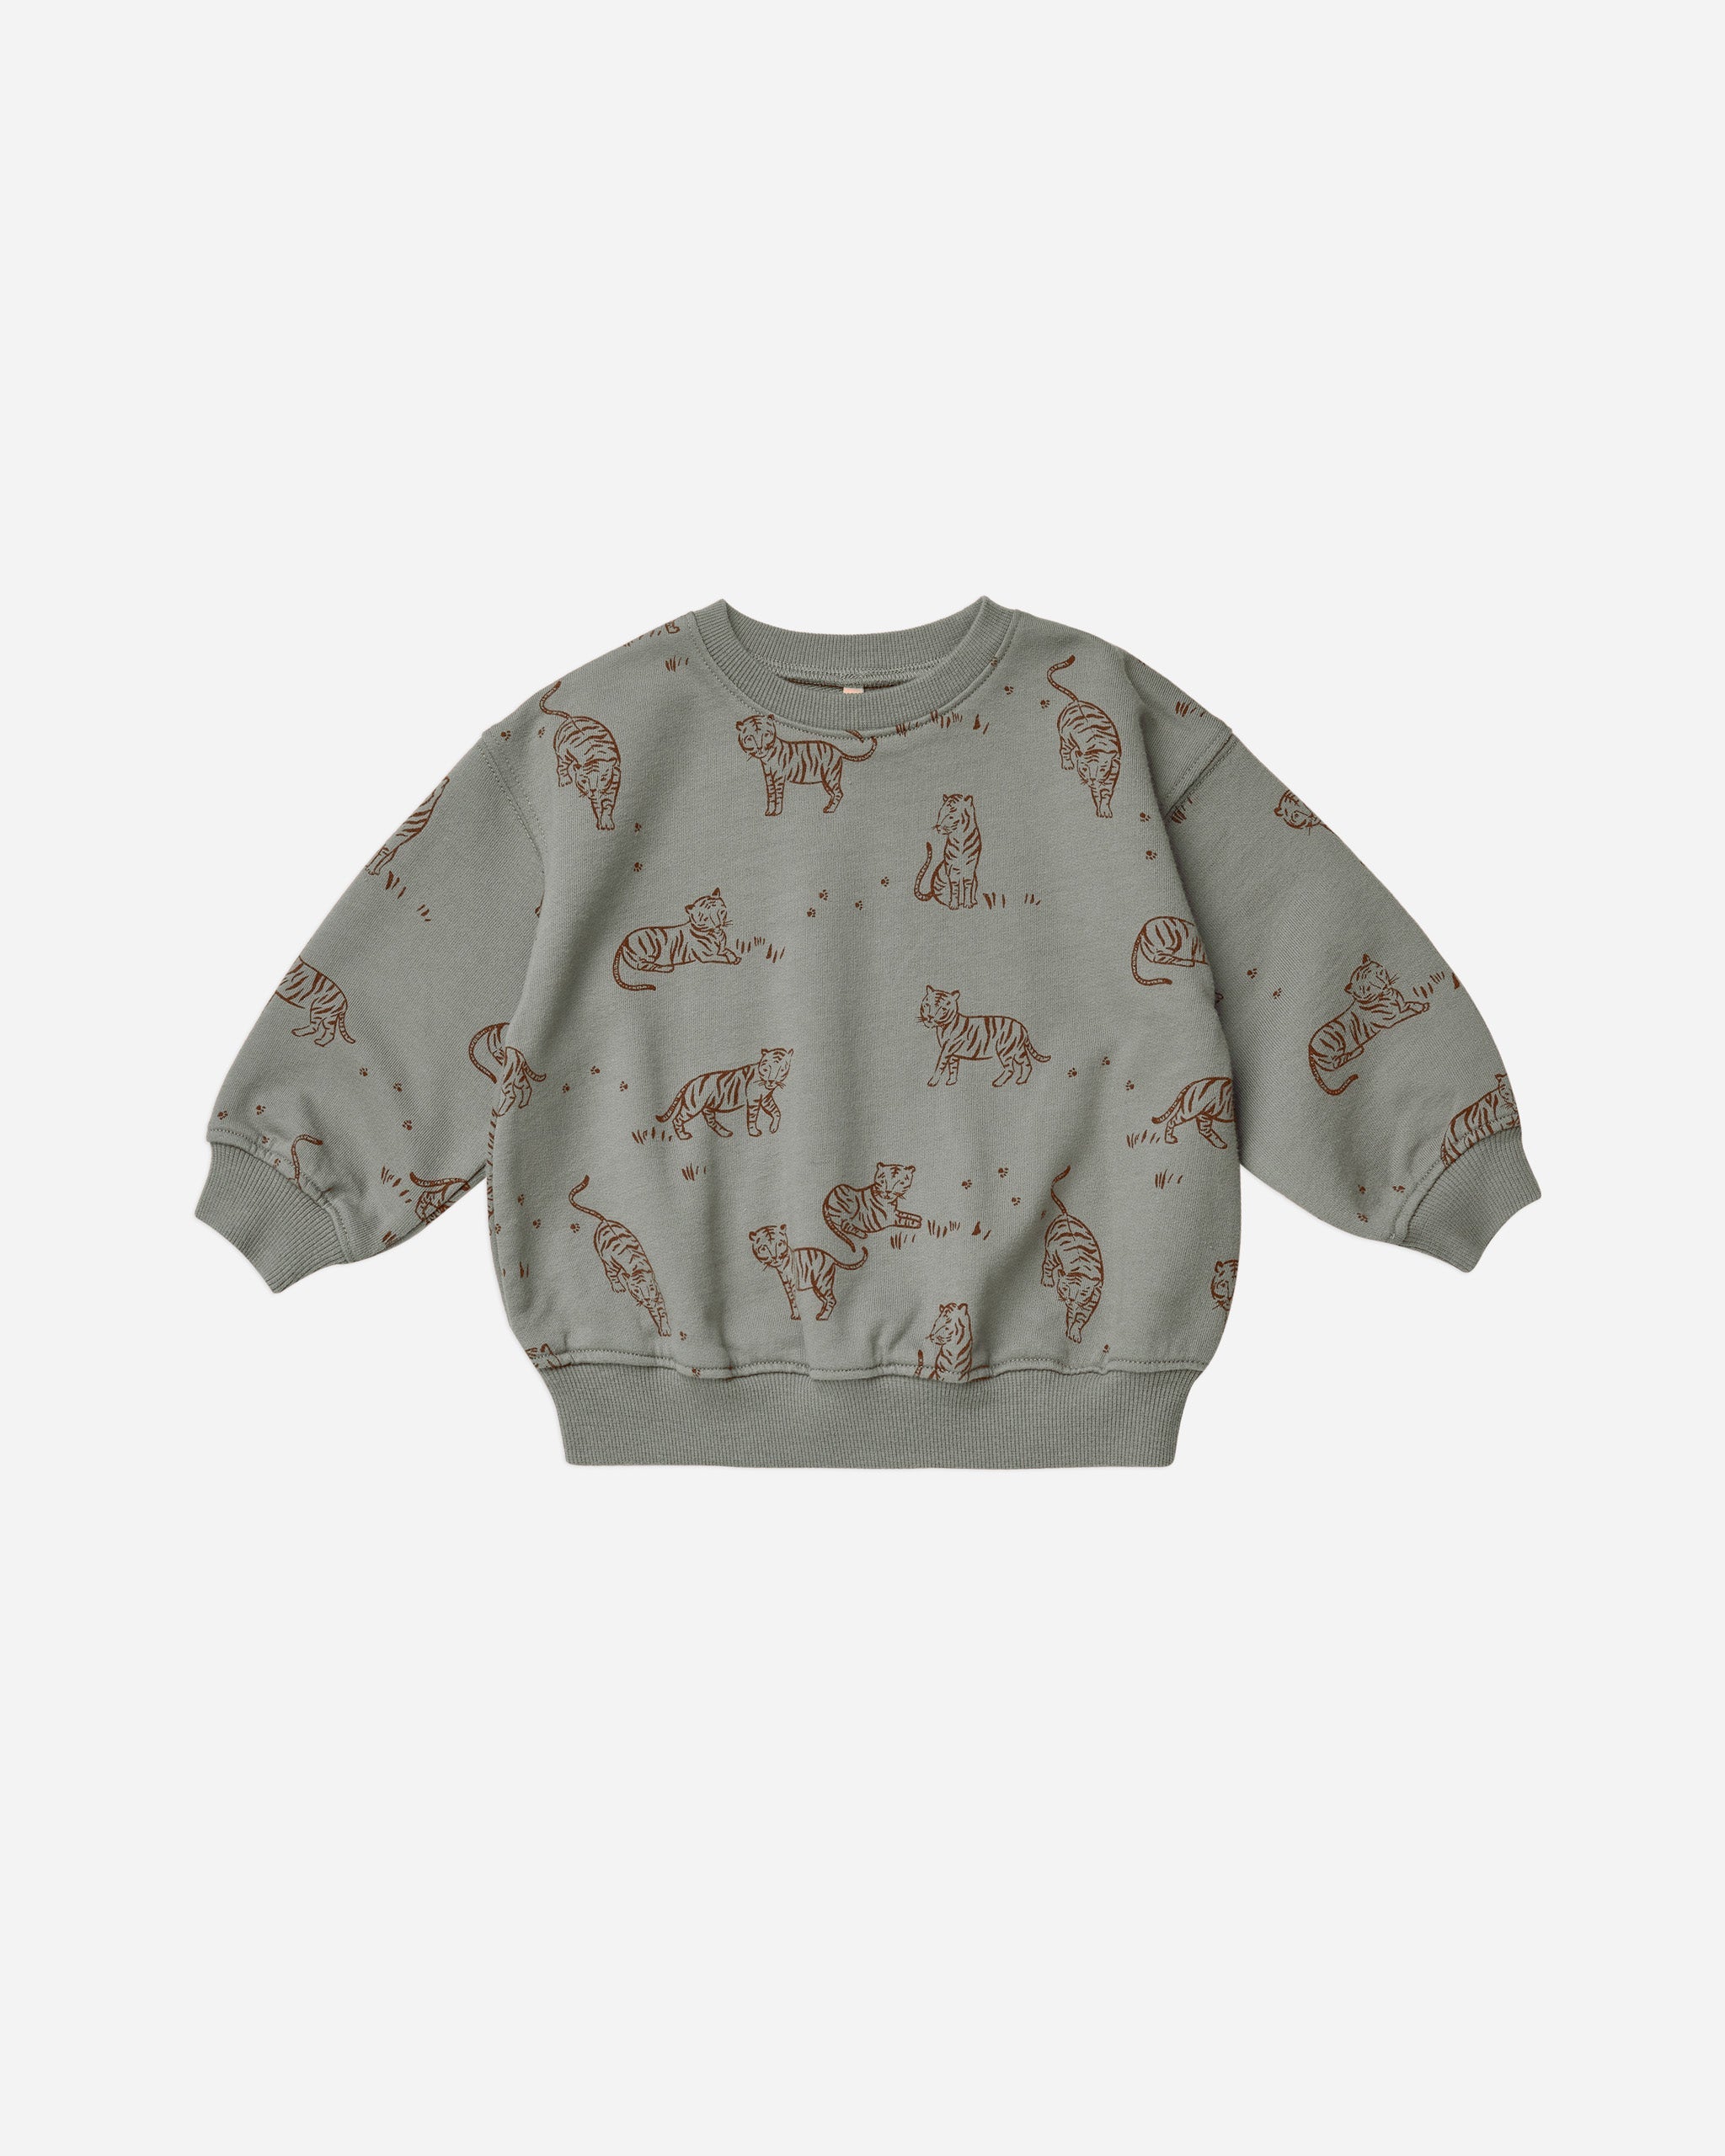 crew neck || tigers - Rylee + Cru | Kids Clothes | Trendy Baby Clothes | Modern Infant Outfits |